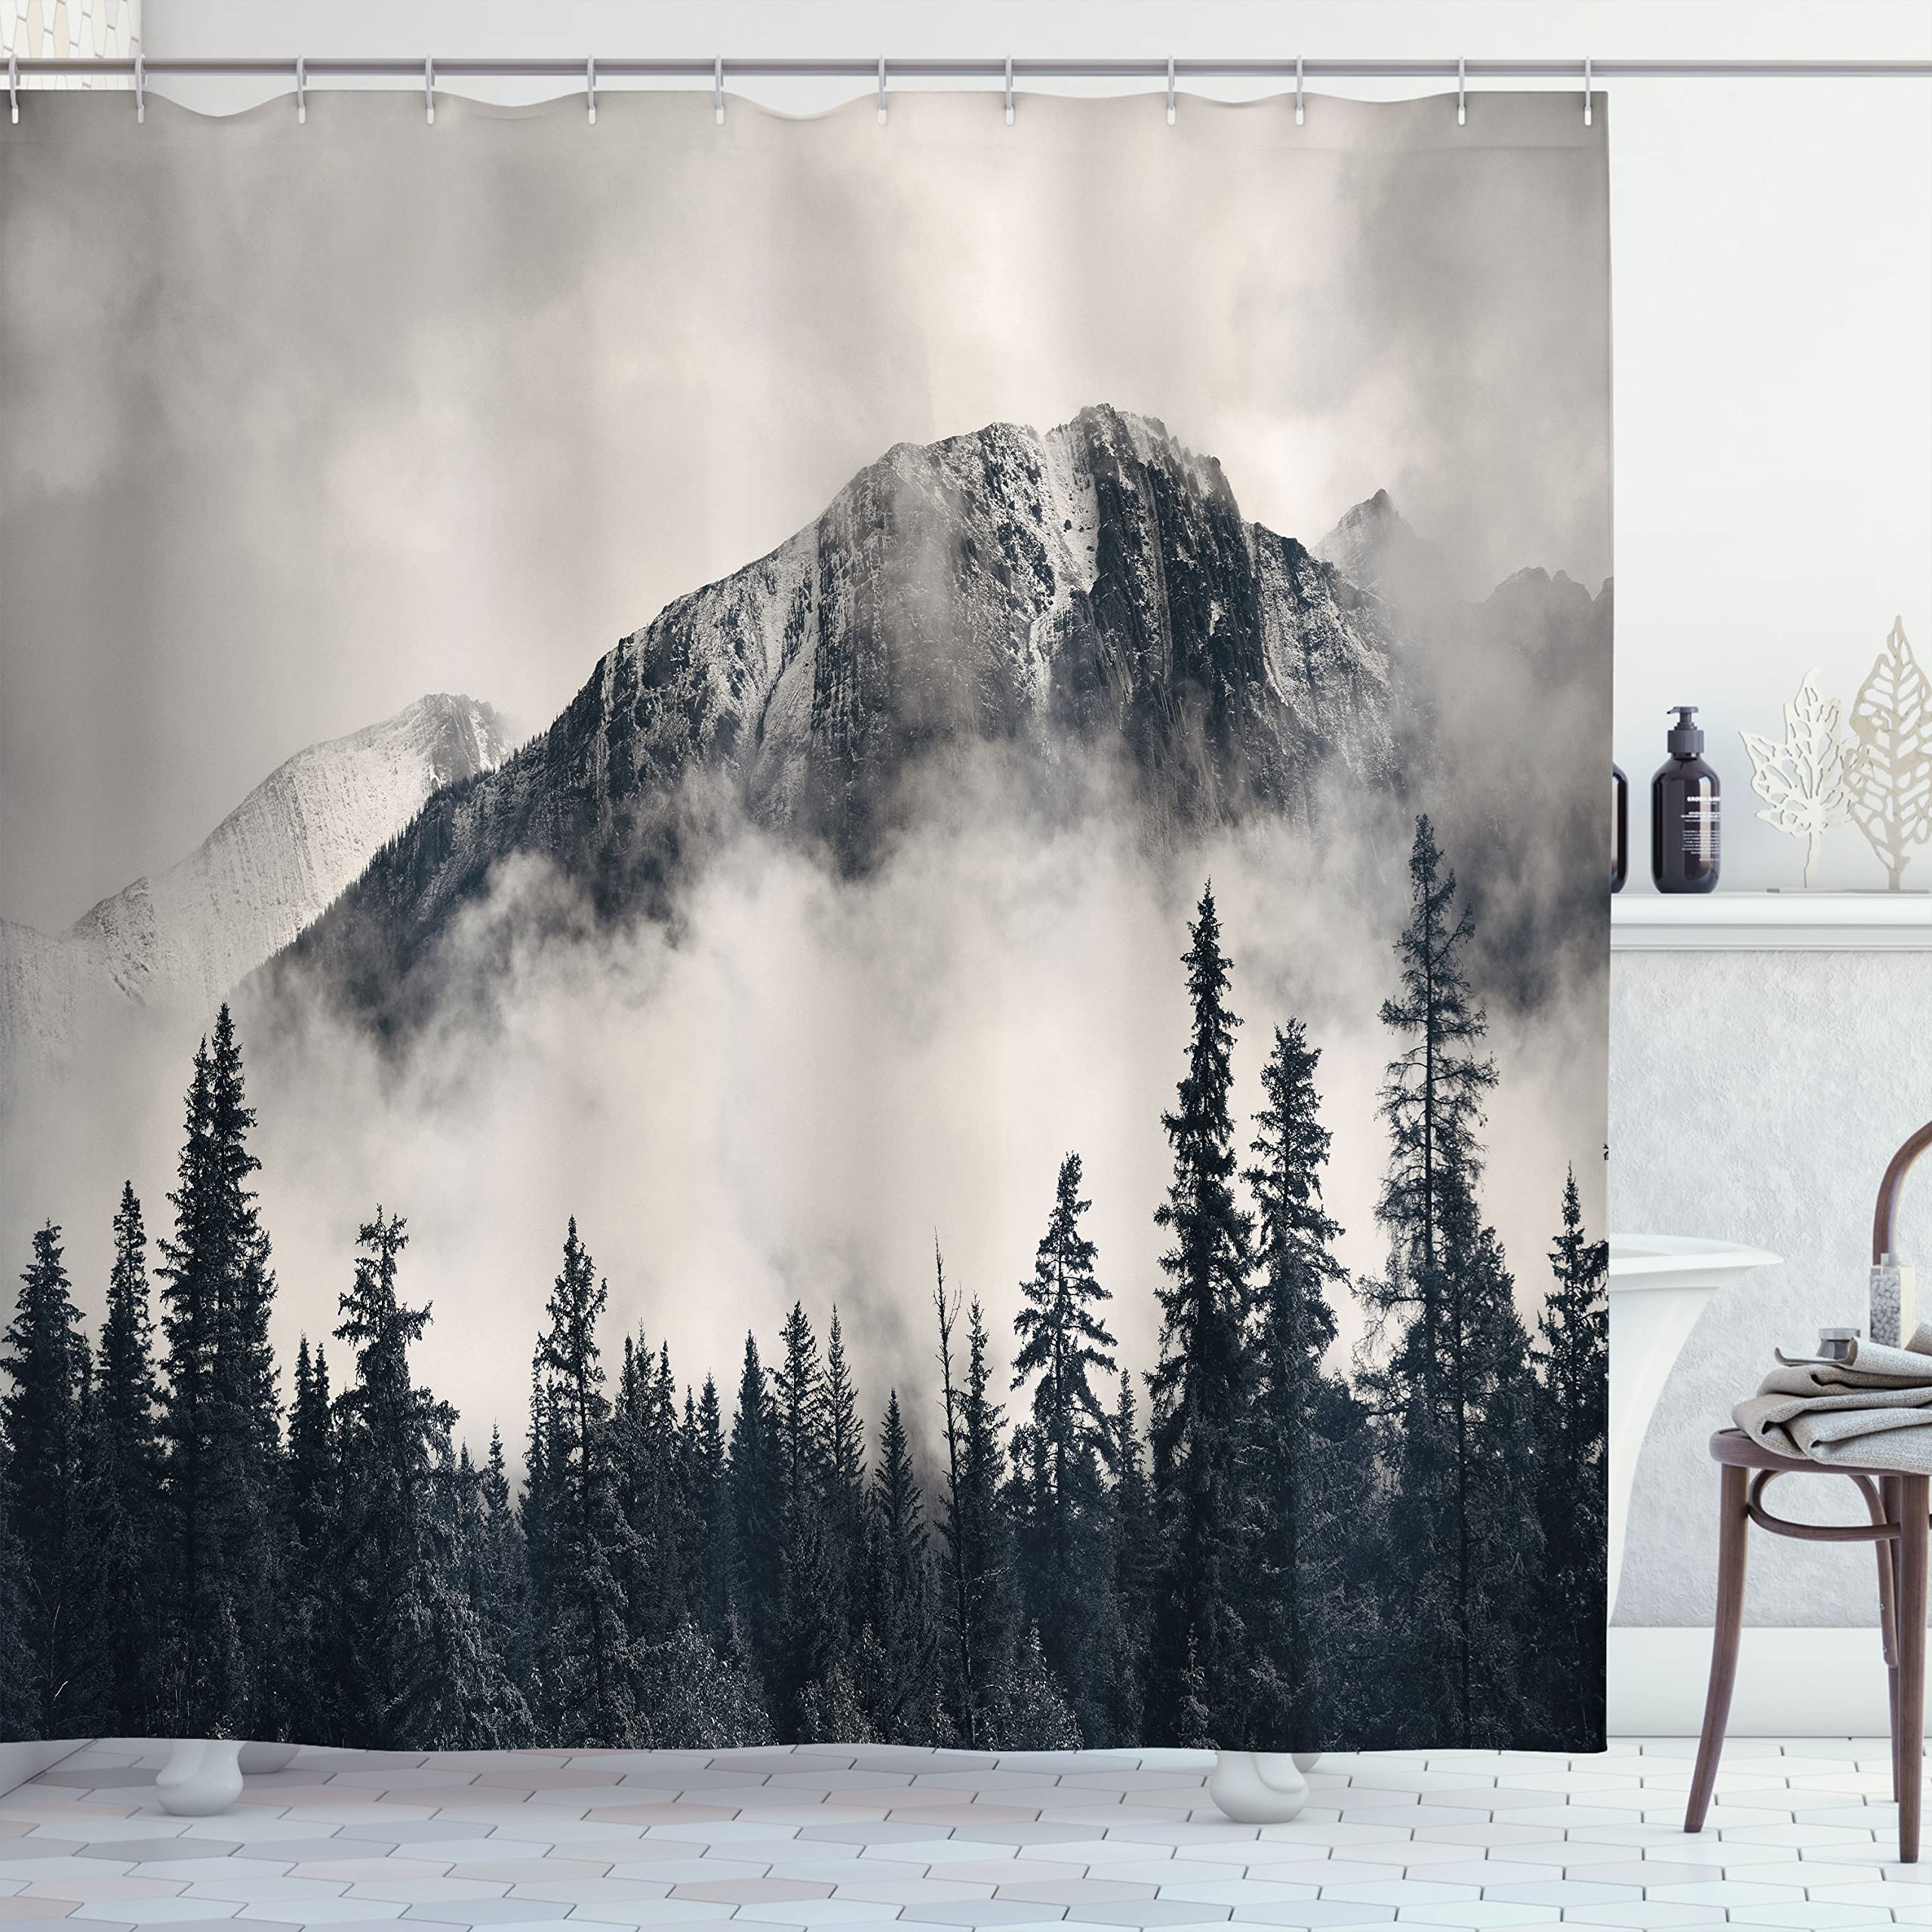 Book Cover Ambesonne National Parks Shower Curtain, Canadian Smokey Mountain Cliff Outdoors Idyllic Scenery Photo Artwork, Cloth Fabric Bathroom Decor Set with Hooks, 69